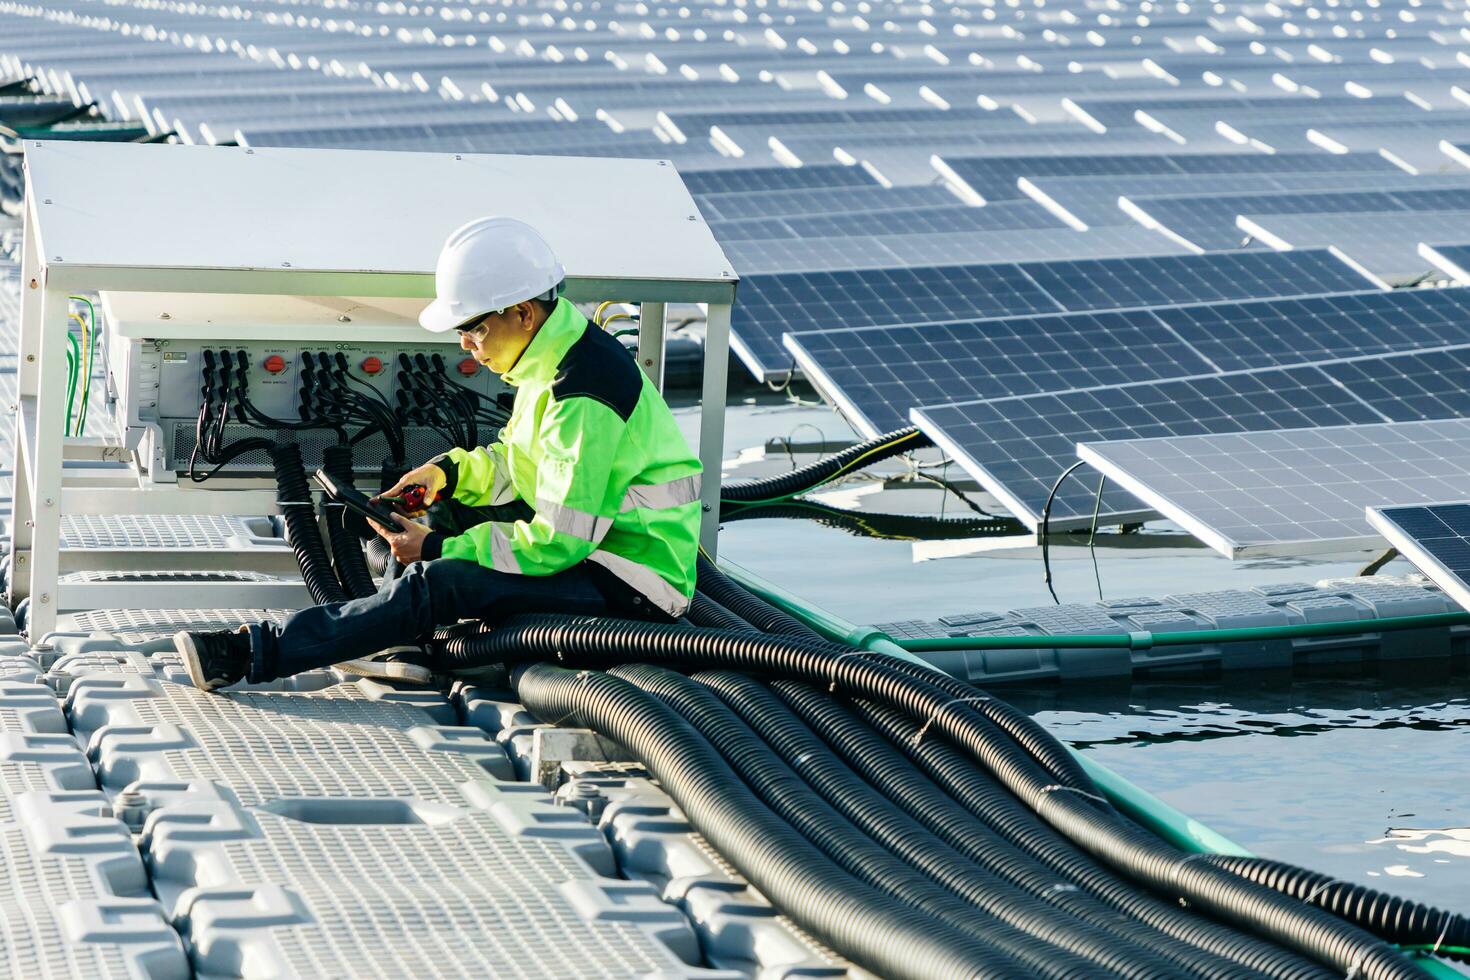 technical expert in solar energy photovoltaic panels, remote control performs routine actions for system monitoring using clean, photo